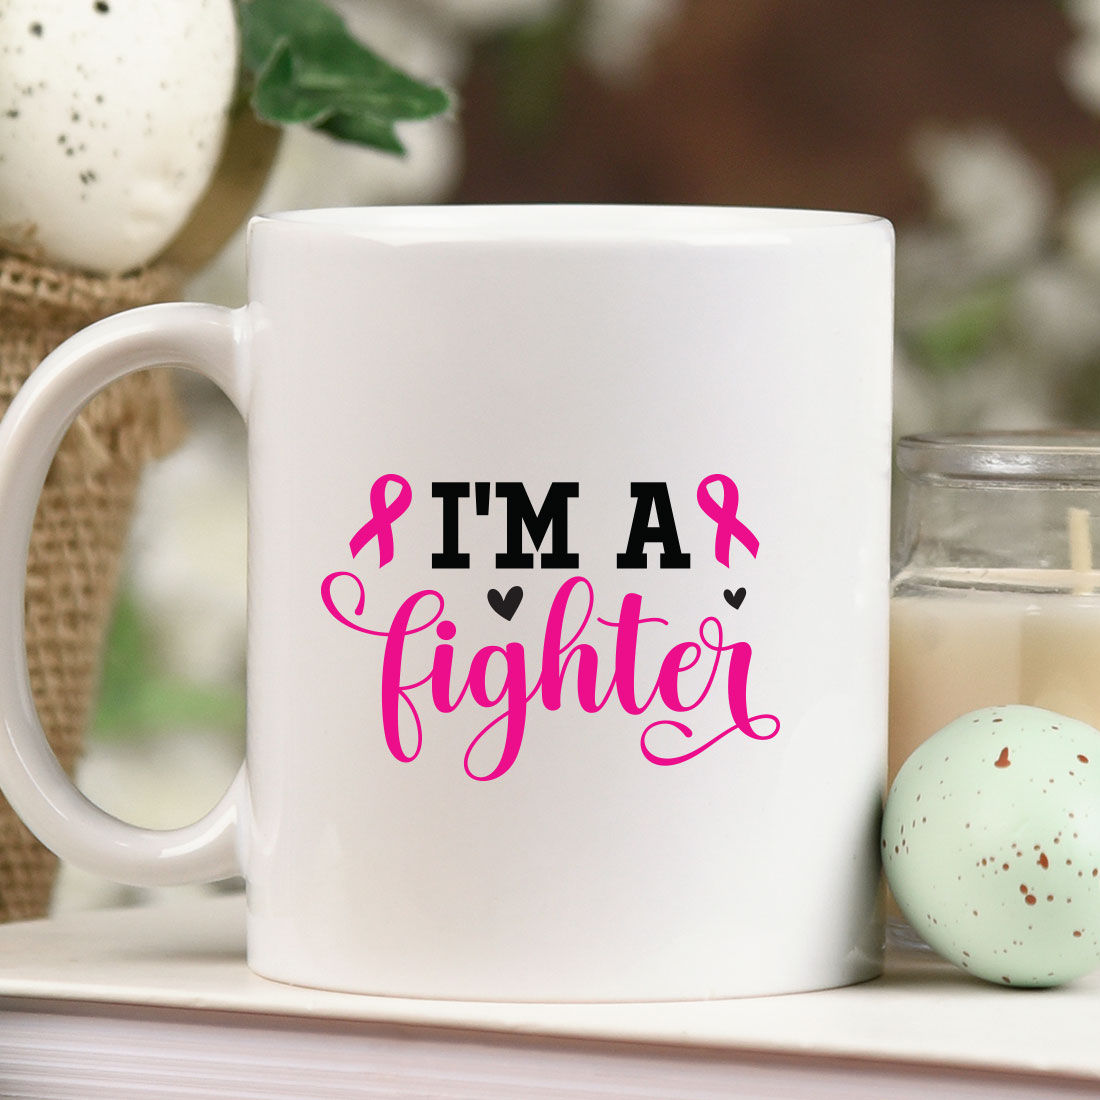 Coffee mug that says i'm a fighter next to a candle.